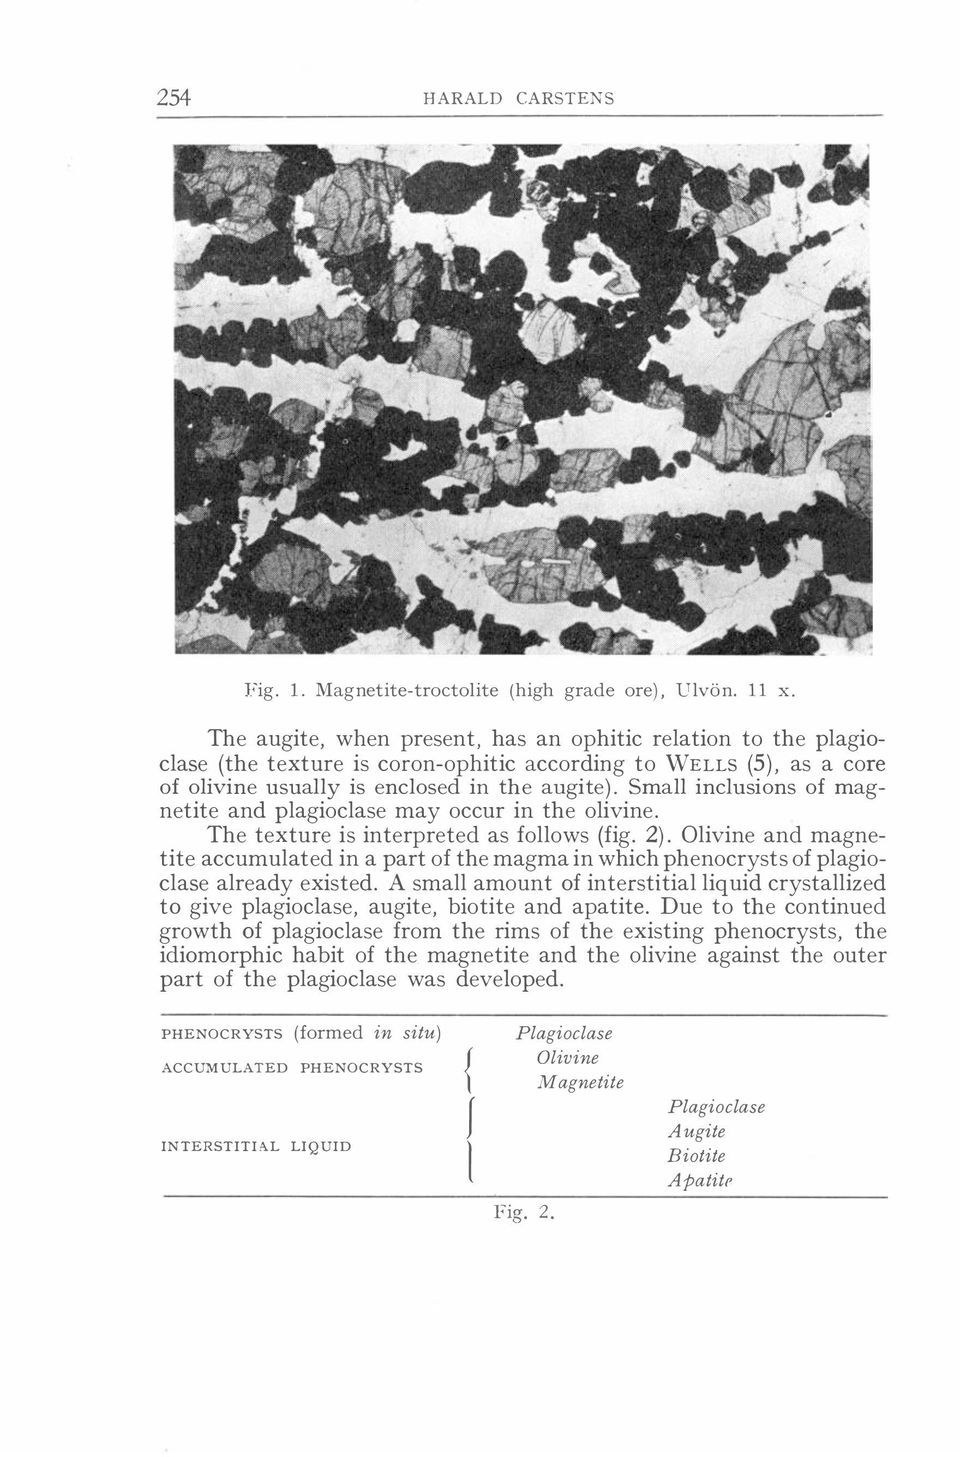 Small inclusions of magnetite and plagioclase may occur in the olivine. The texture is interpreted as follows (fig. 2).